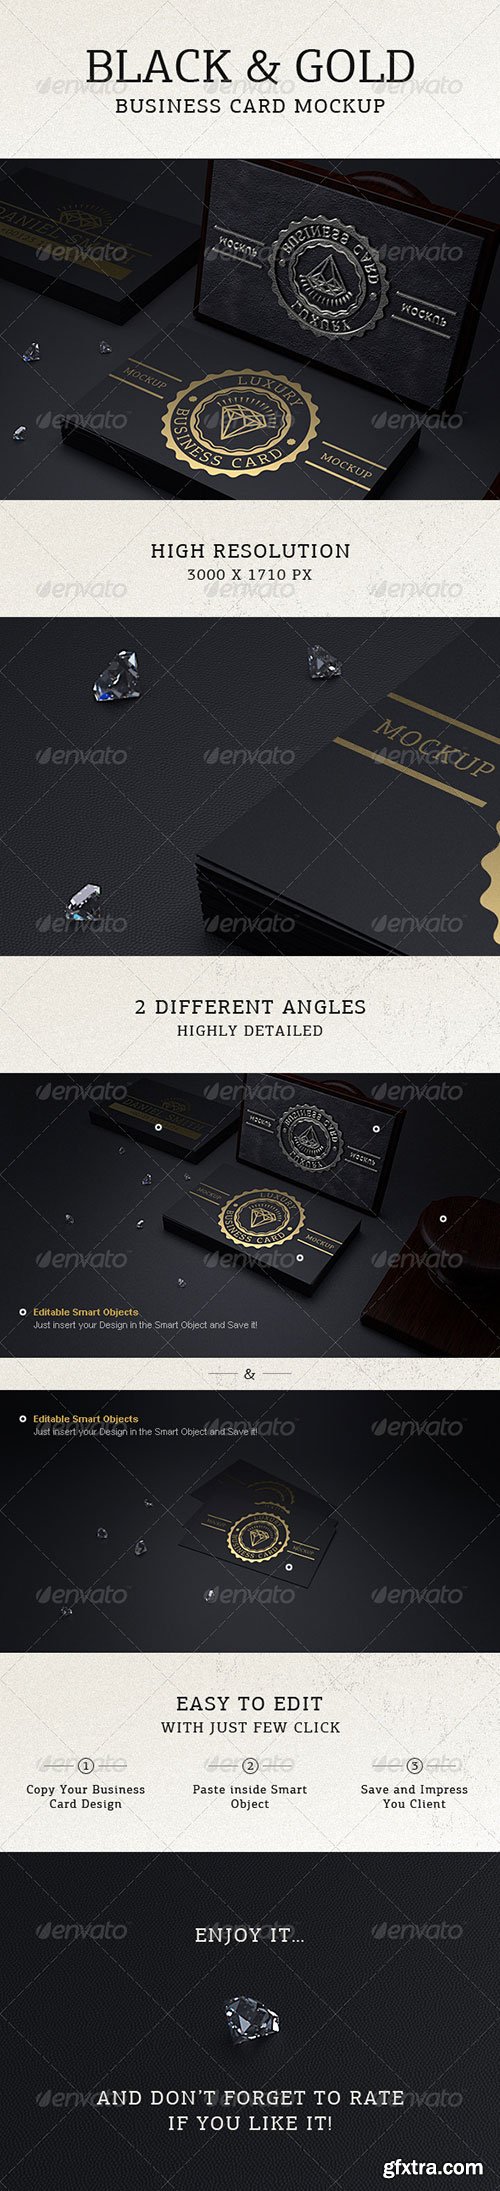 GraphicRiver - Photorealistic Black & Gold Business Card Mock Up